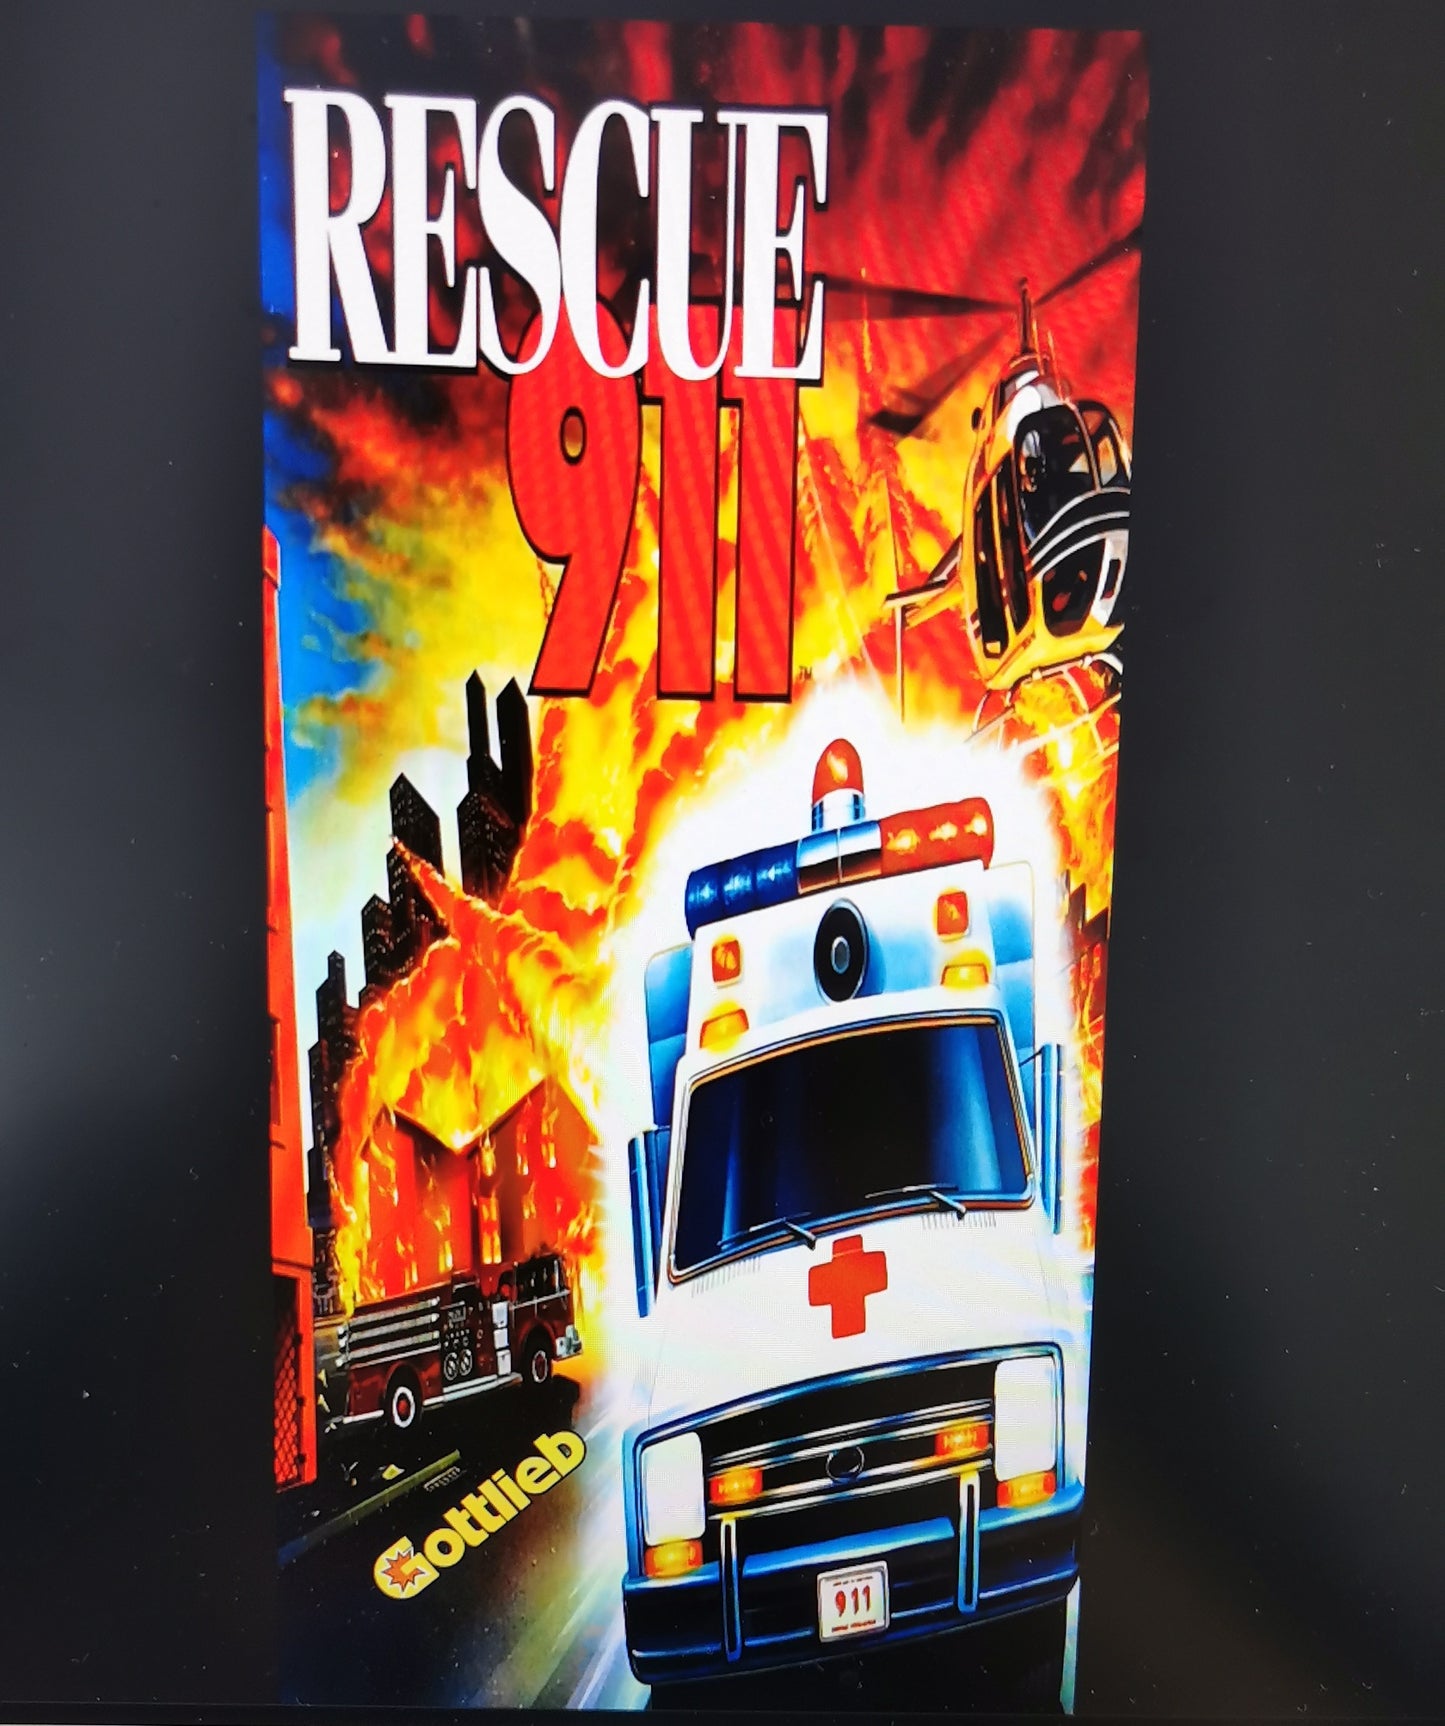 Pinball cover protection Rescue 911